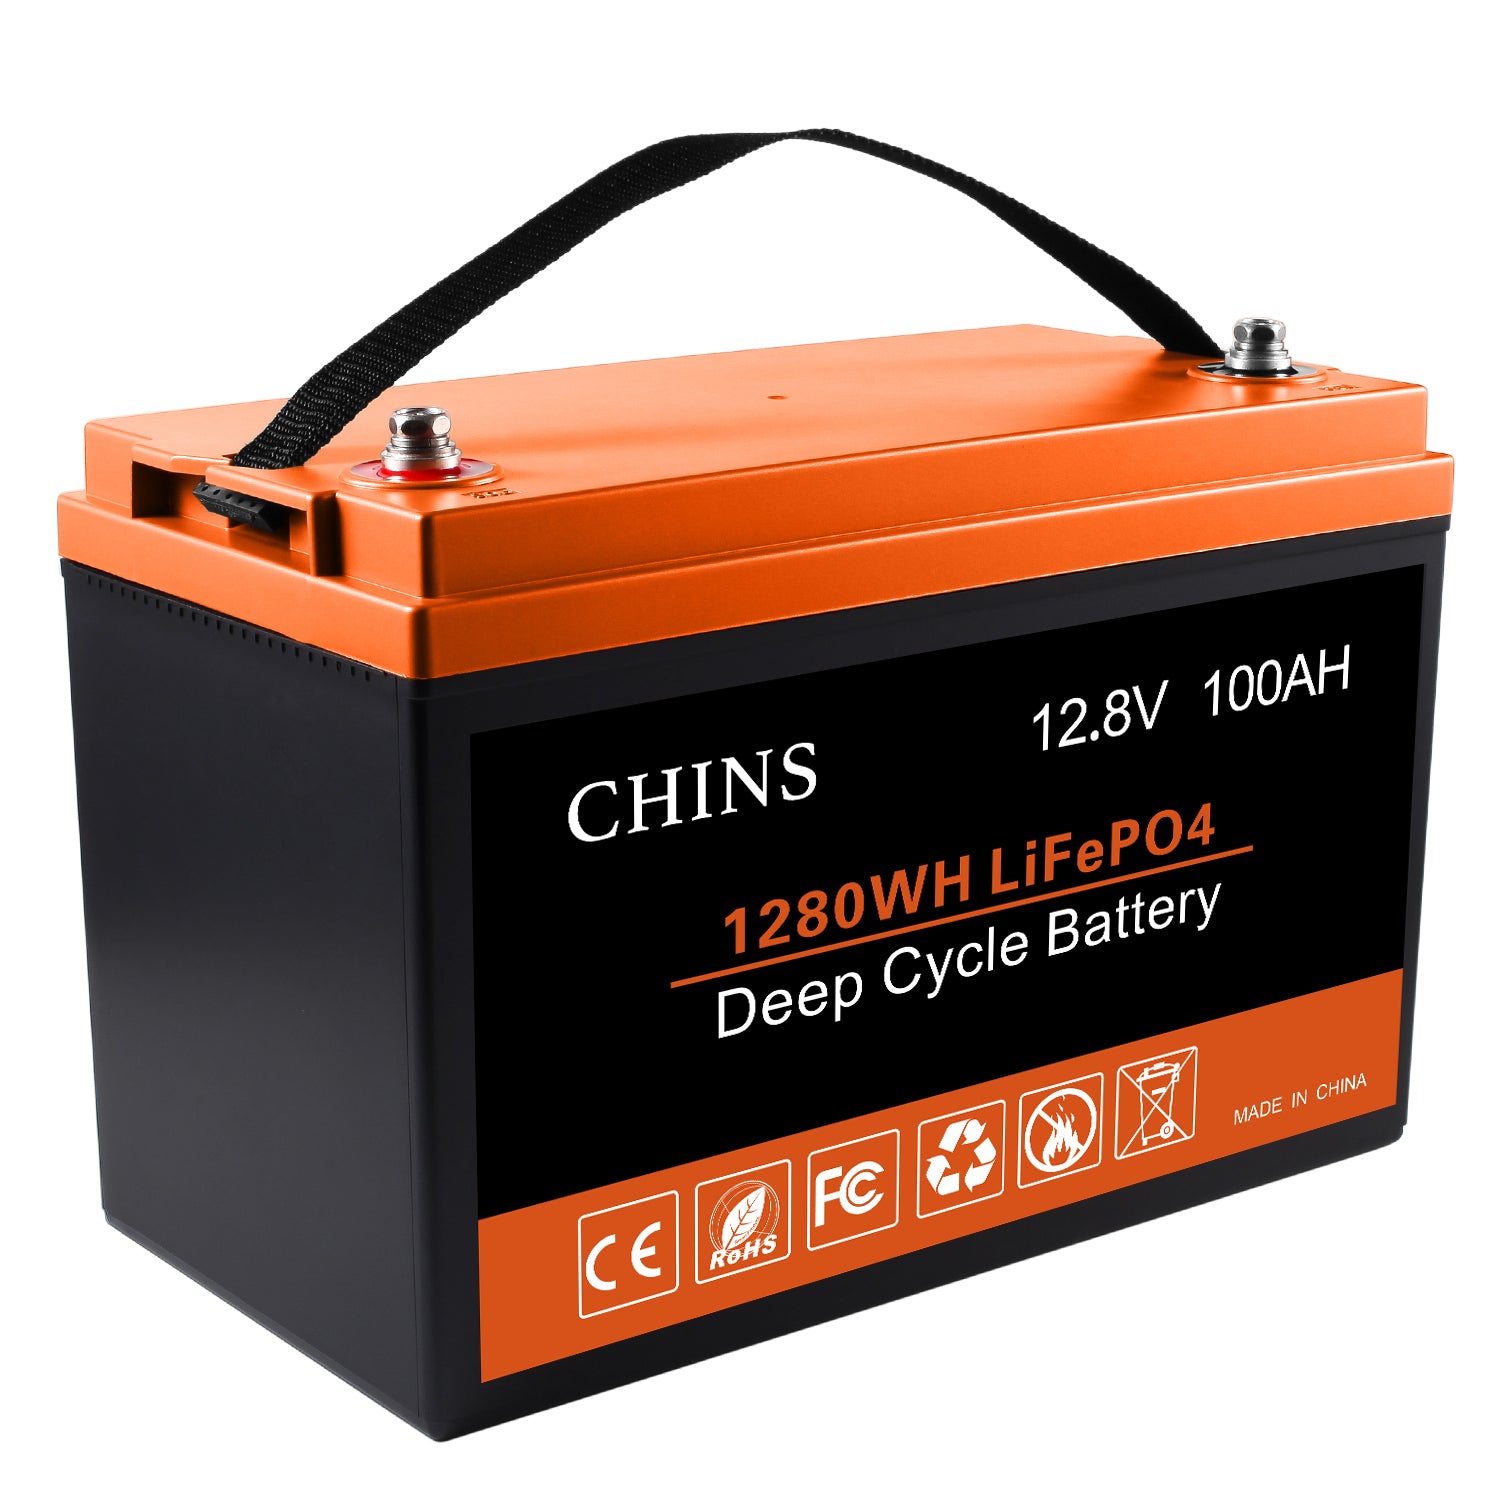 CHINS 12V 100AH LiFePO4 Lithium Battery - Built-in 100A BMS, Perfect for  Replacing Most of Backup Power, Home Energy Storage and Off-Grid etc.